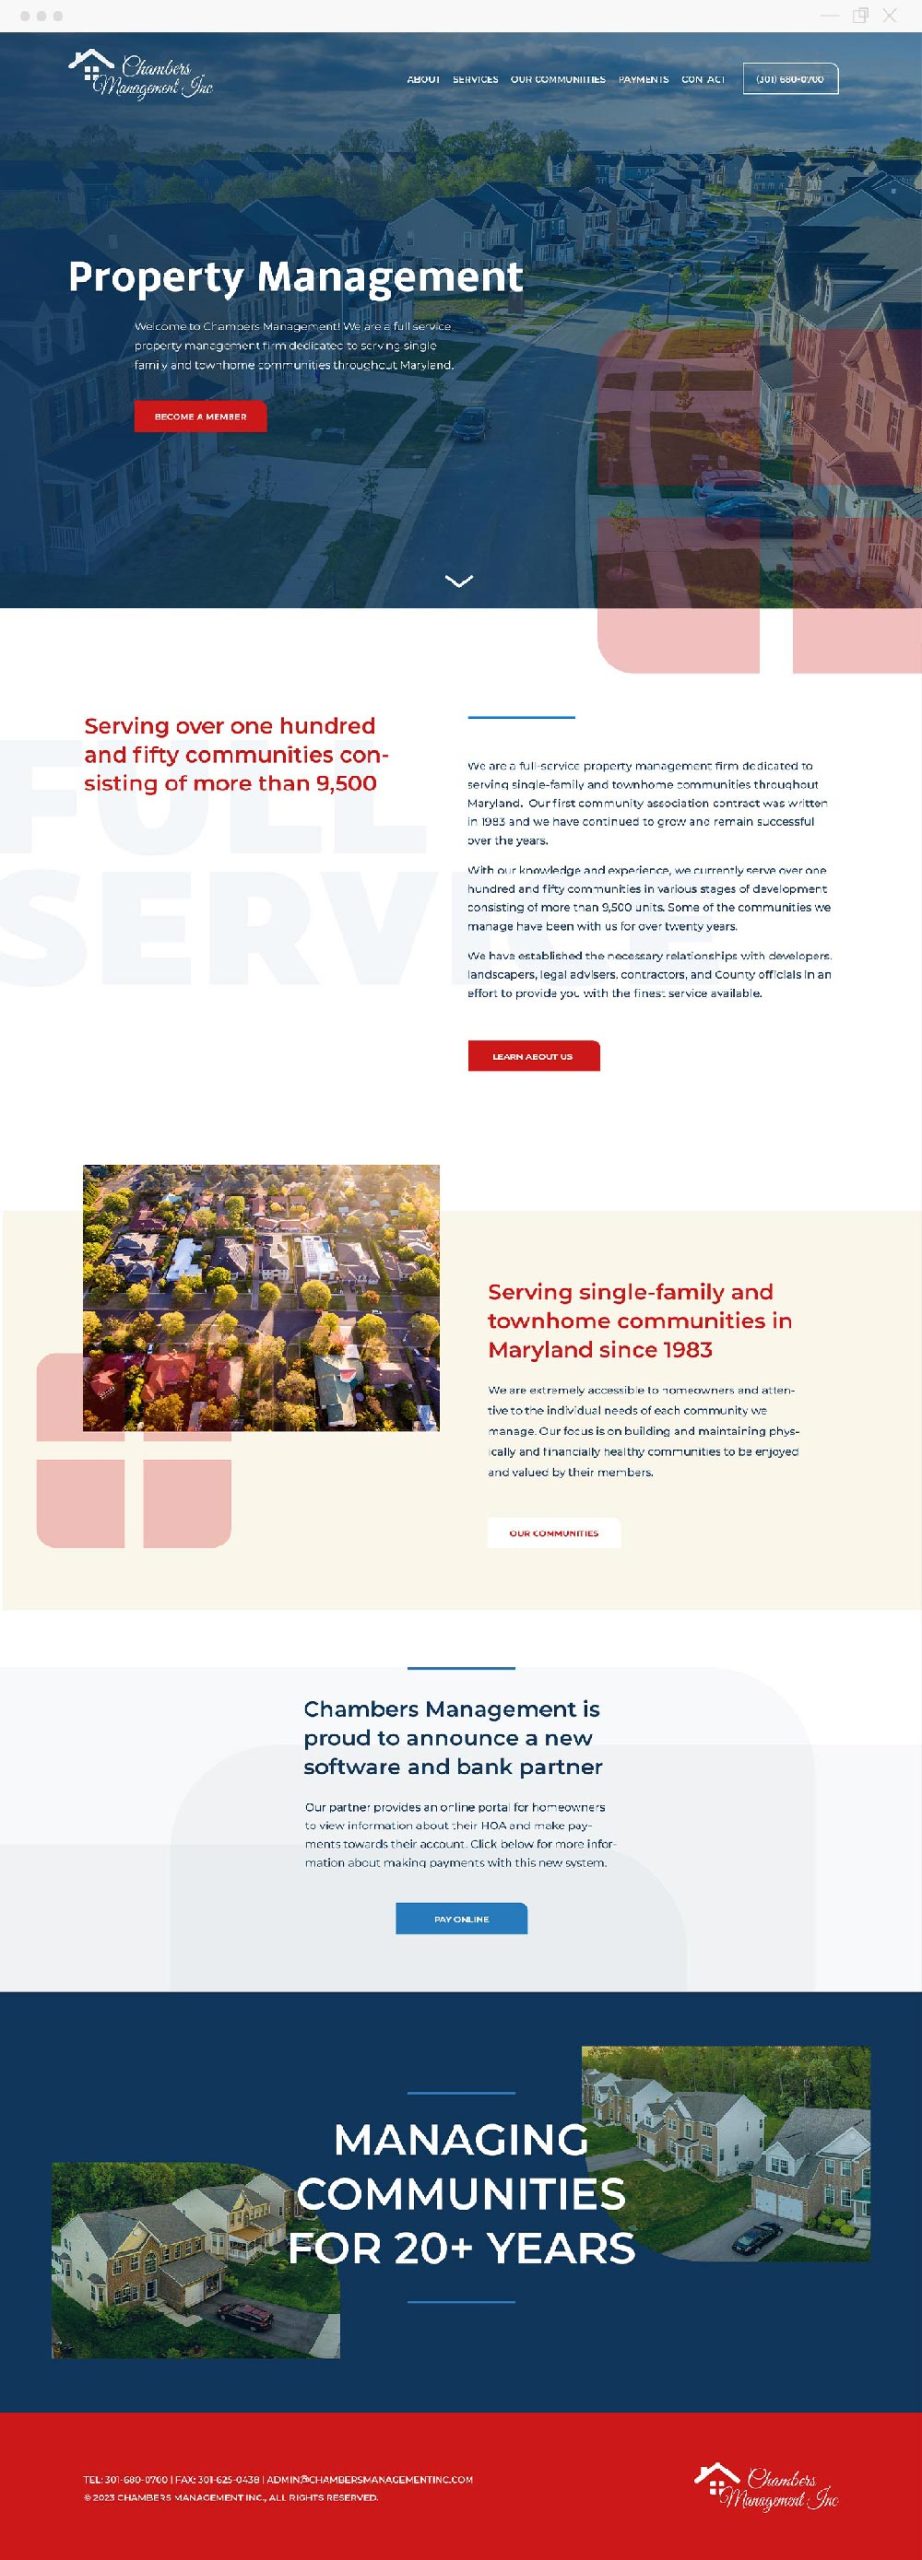 Chambers Management Inc home page website design by Blenderhouse Creative